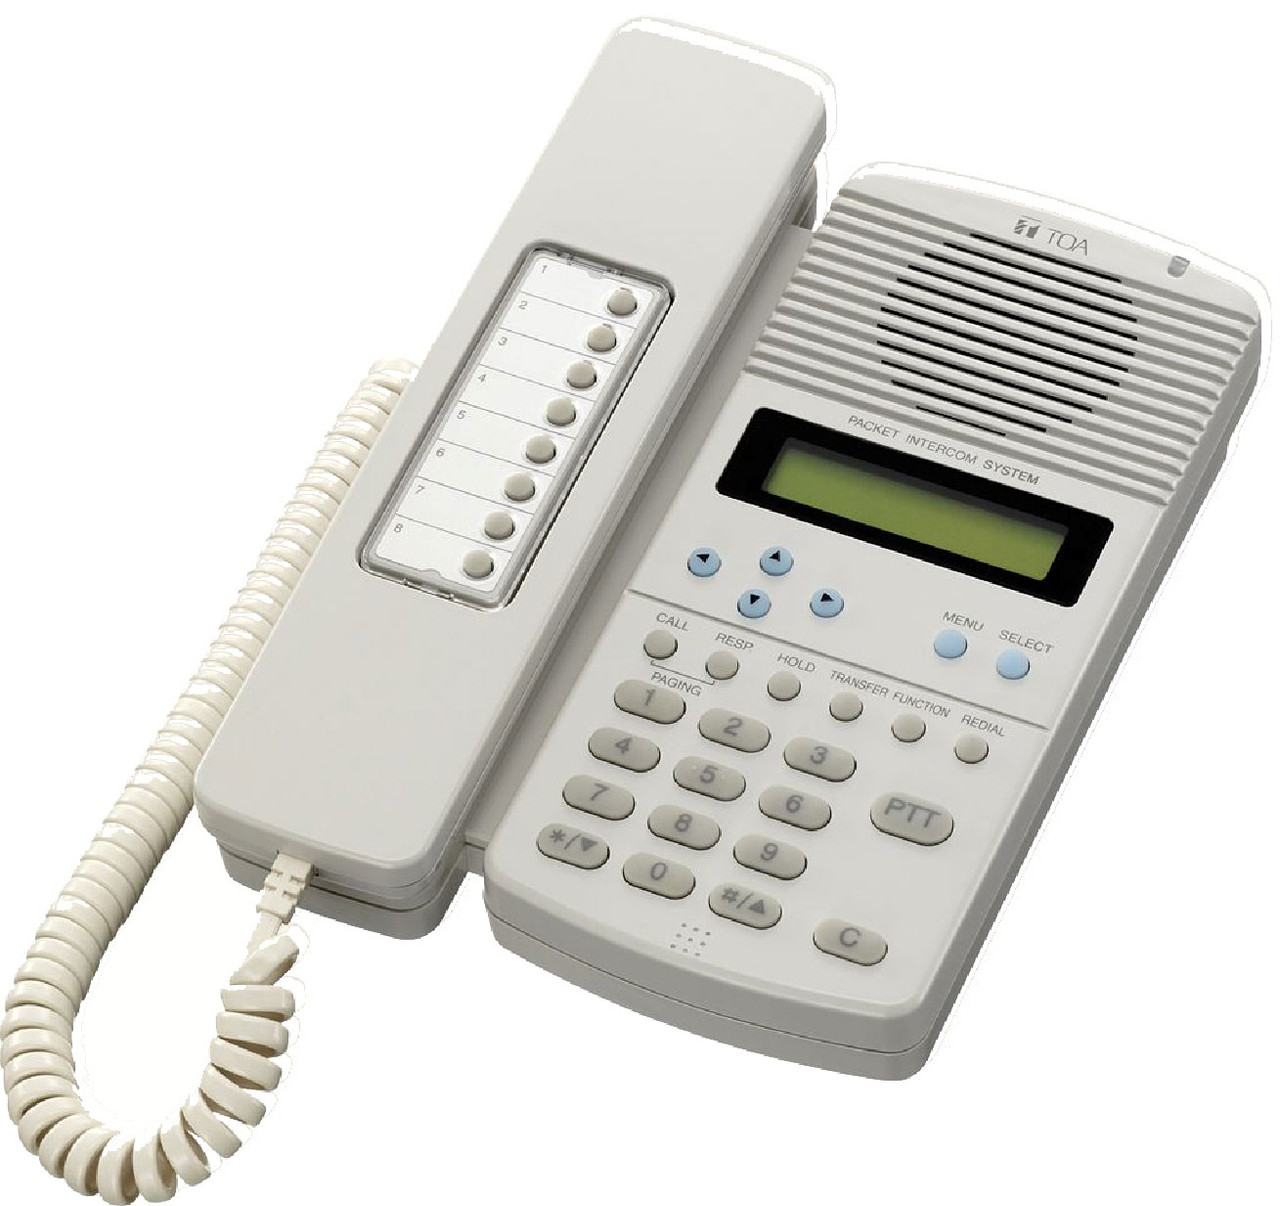 TOA N-8600MS IP Master Station With Caller ID And Backlit Display